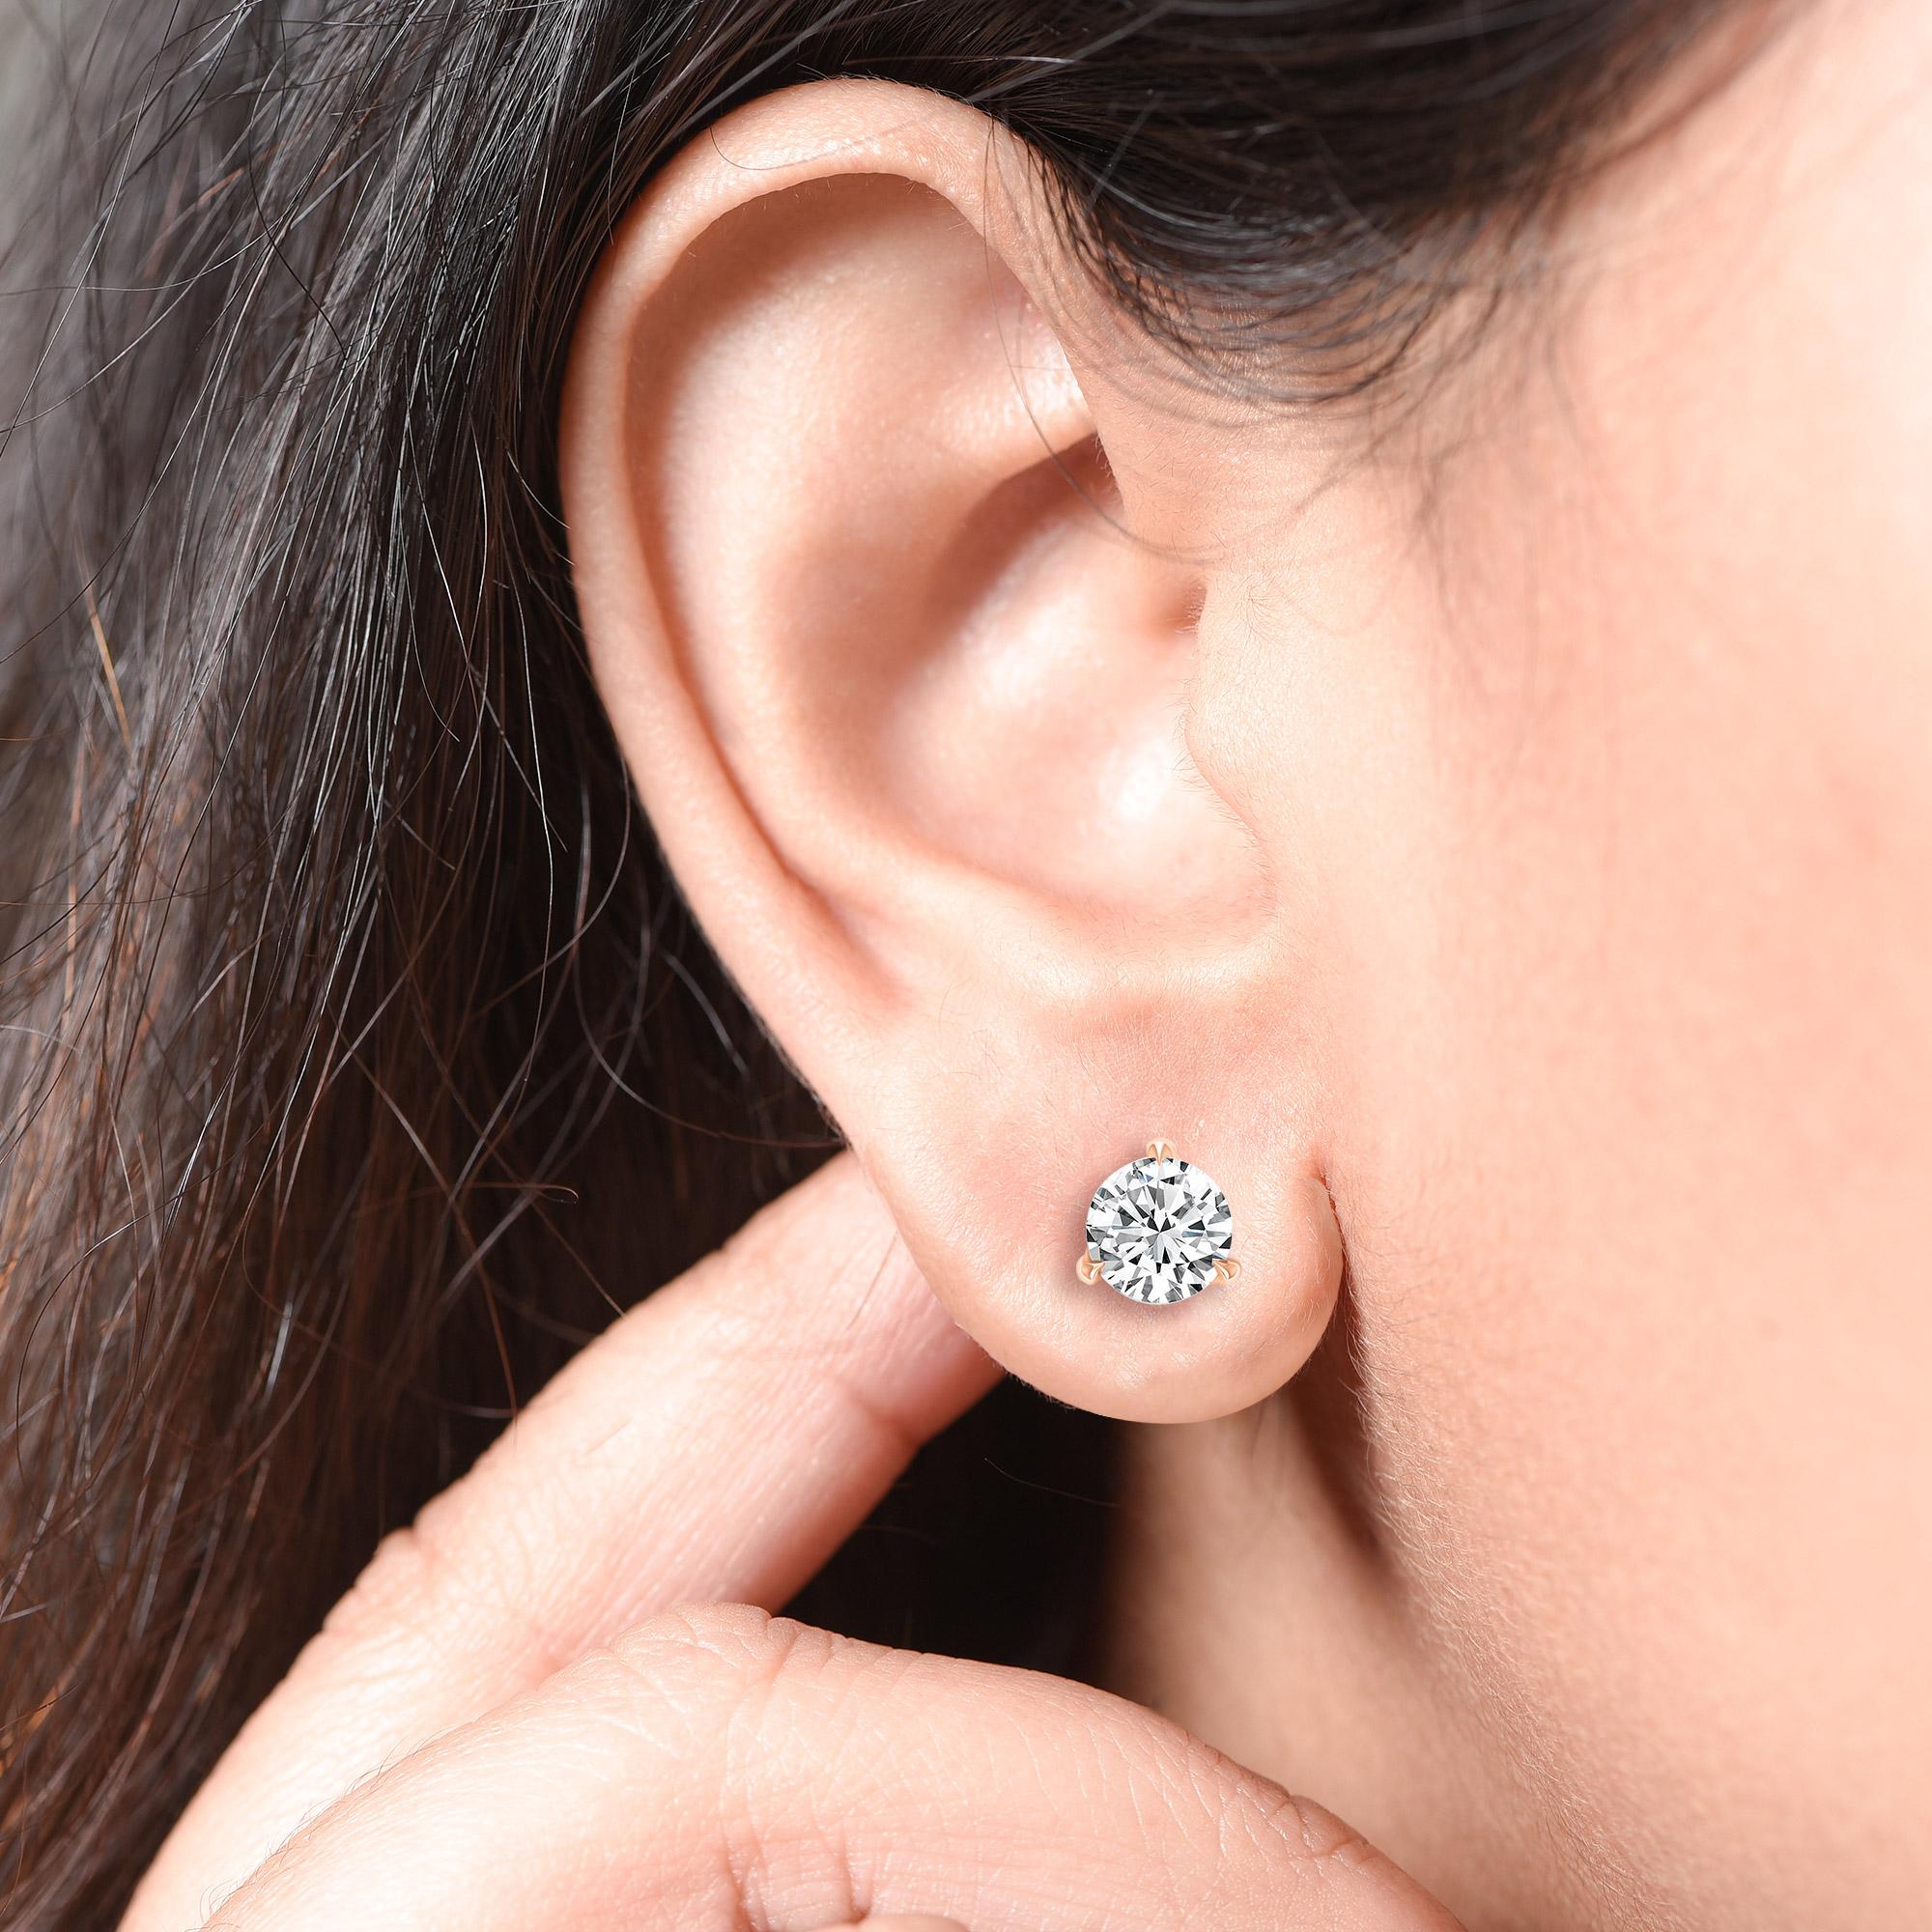 These GIA certified classic diamond studs showcase a pair of perfectly matched diamonds weighing total 1.50 carat. Crafted in 18-karat rose gold, these three prong earrings are available in white and yellow gold as well.

Perfect for gifting and for